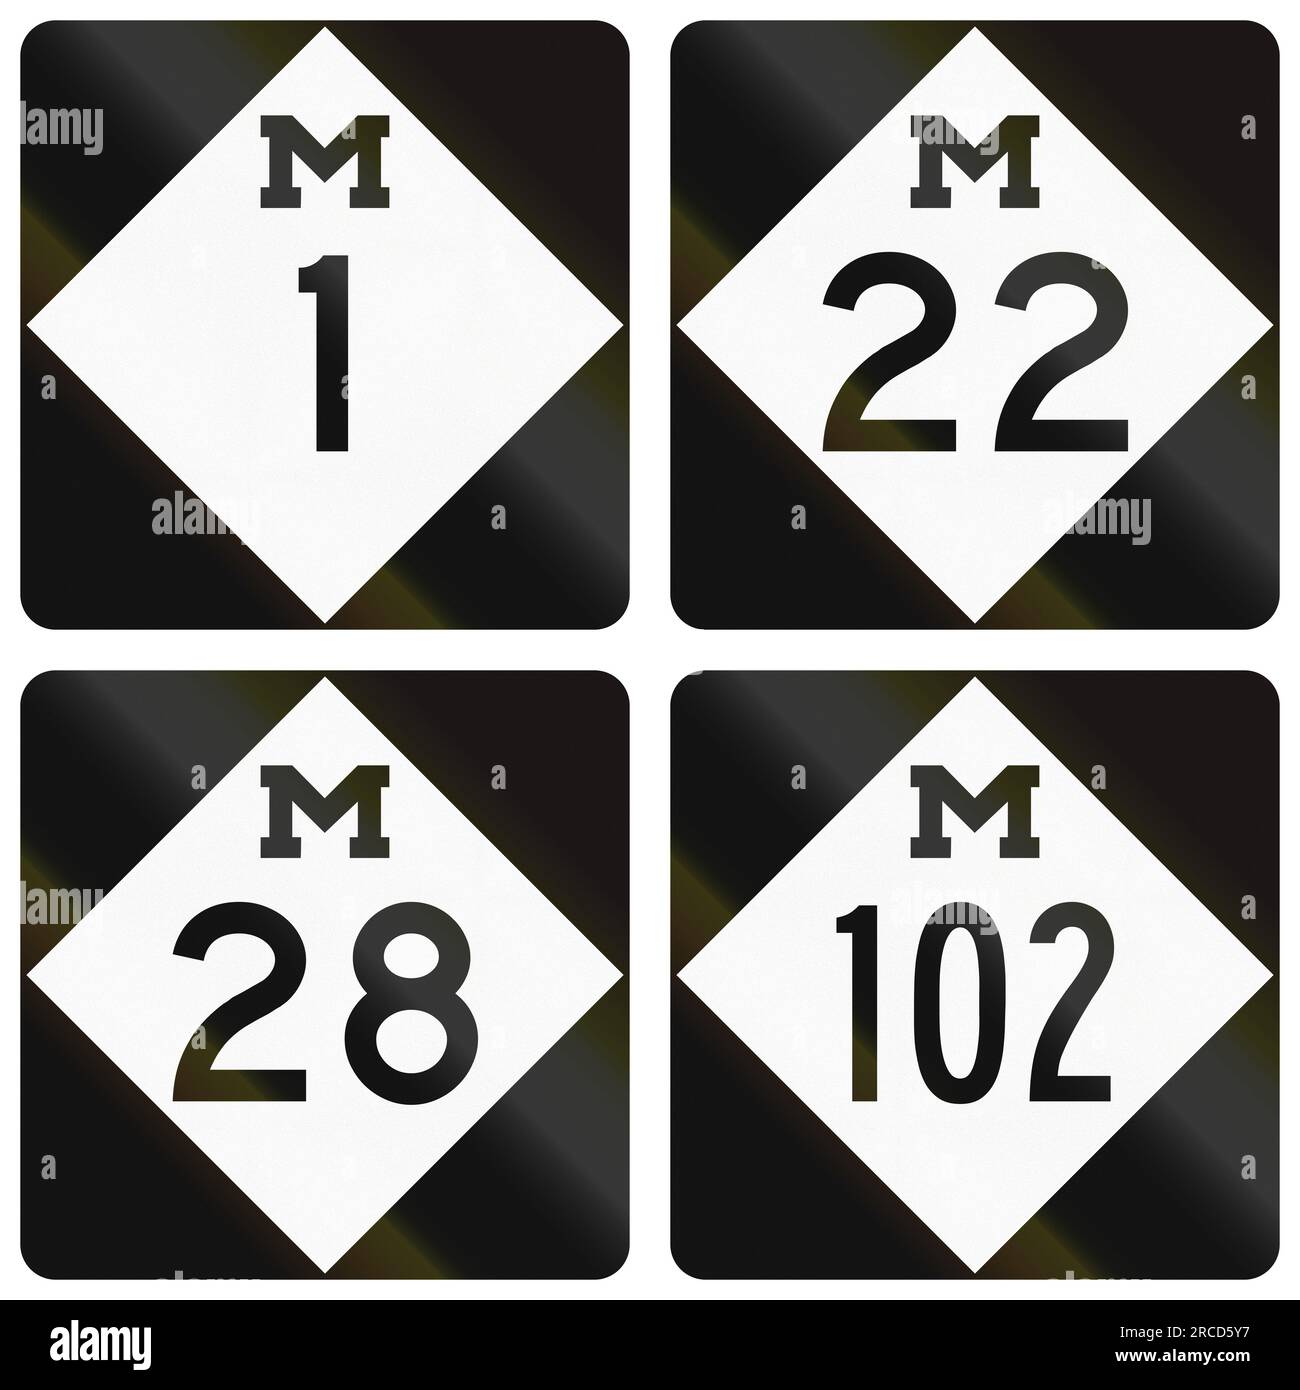 michigan state road signs